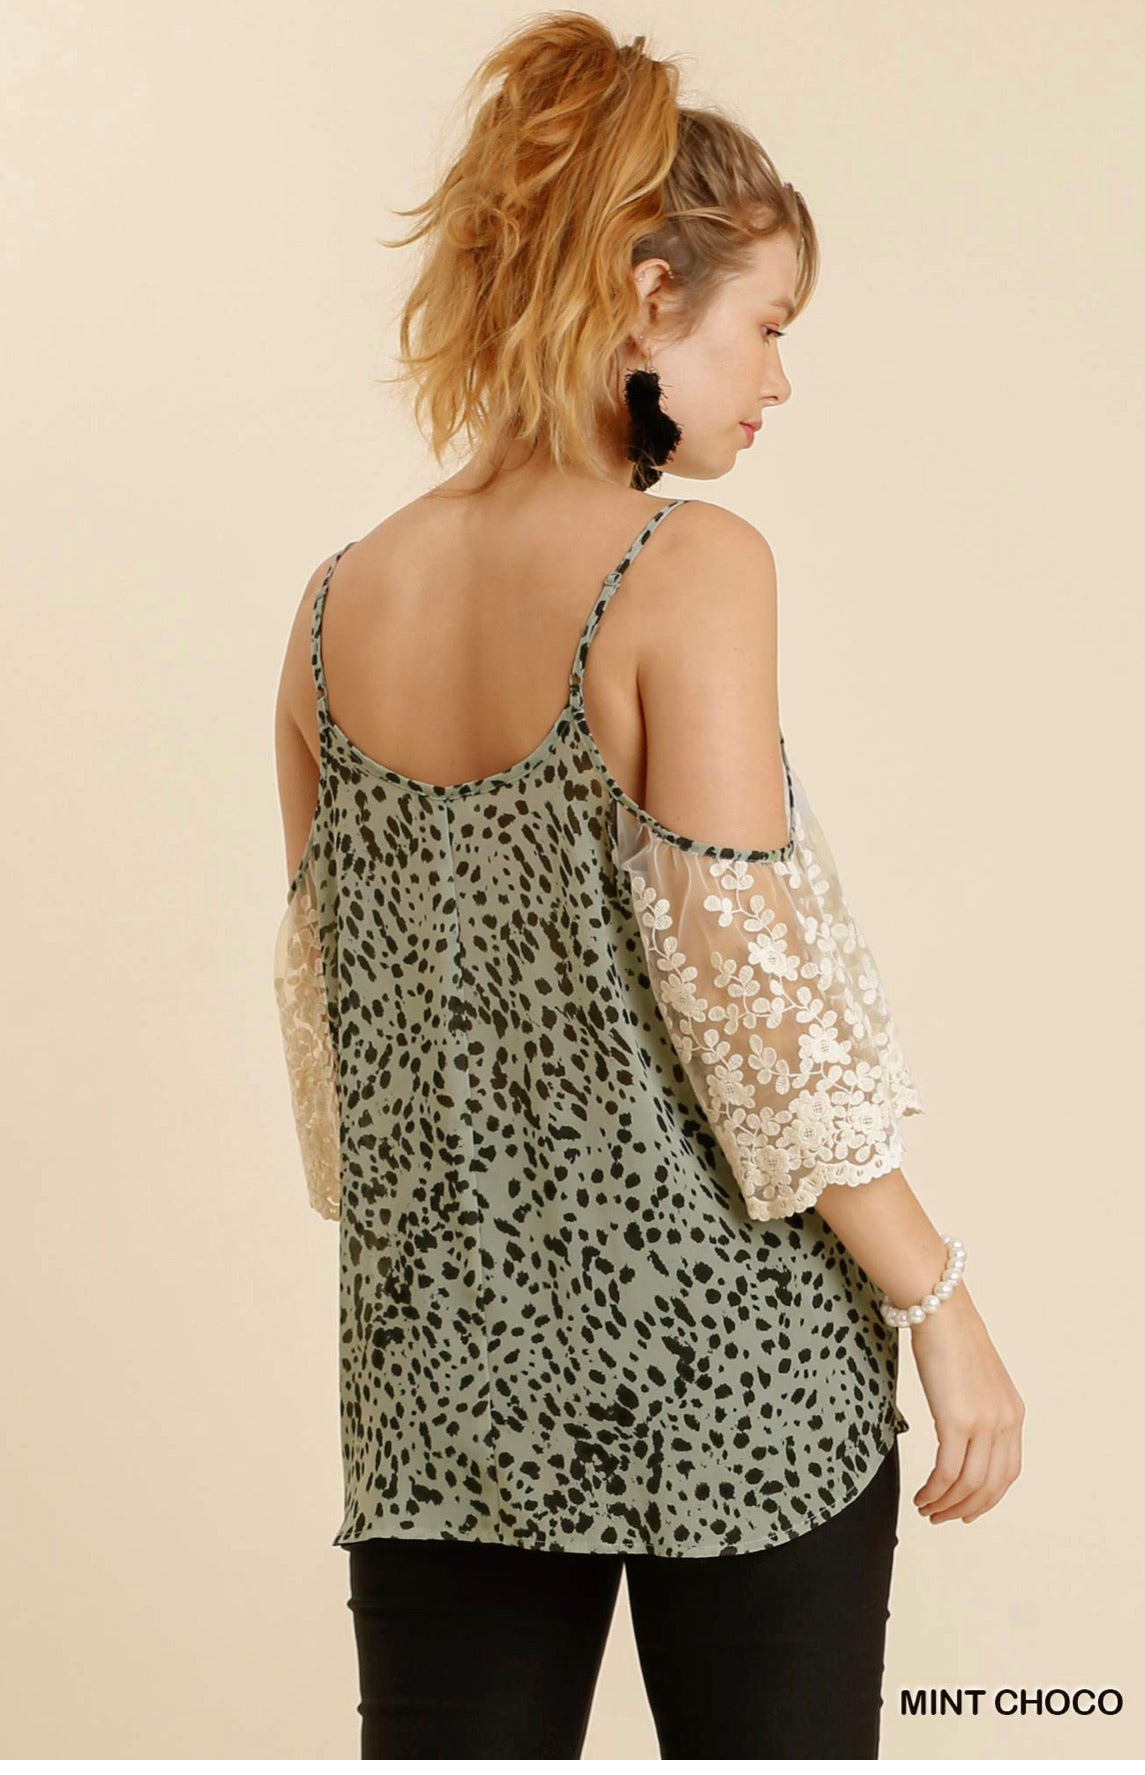 SHEEER ANIMAL PRINT WITH FLORAL LACE TOP